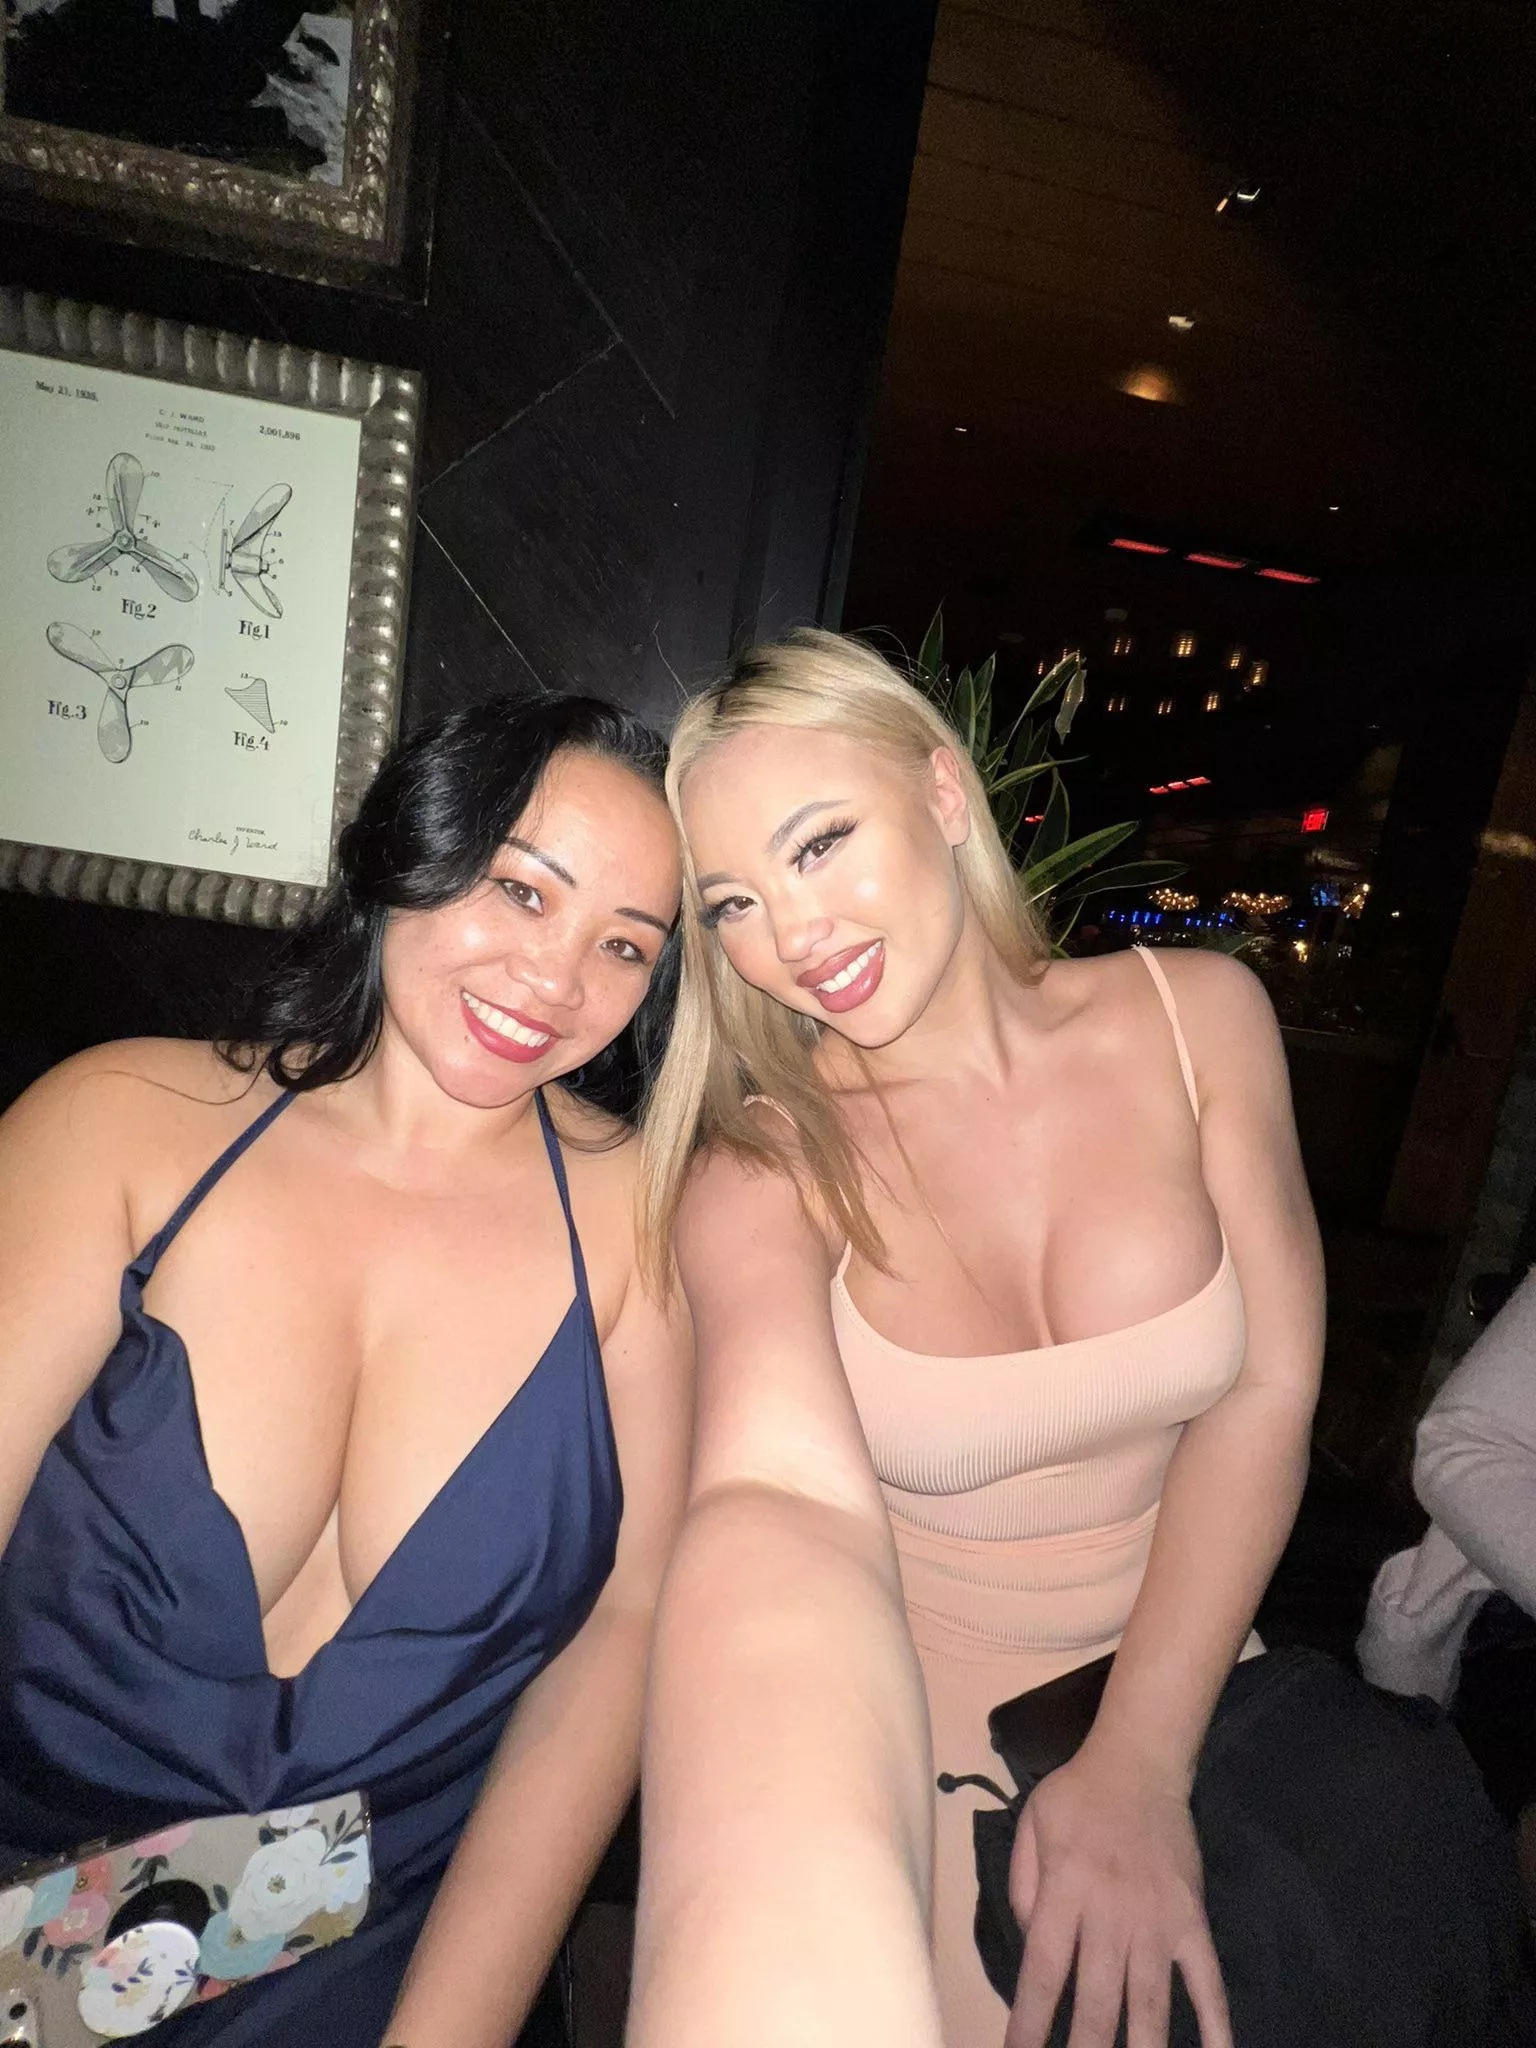 Kazumi and her mom at a bar trying to pick up a lucky young dude for them to fuck nudes GLAMOURHOUND